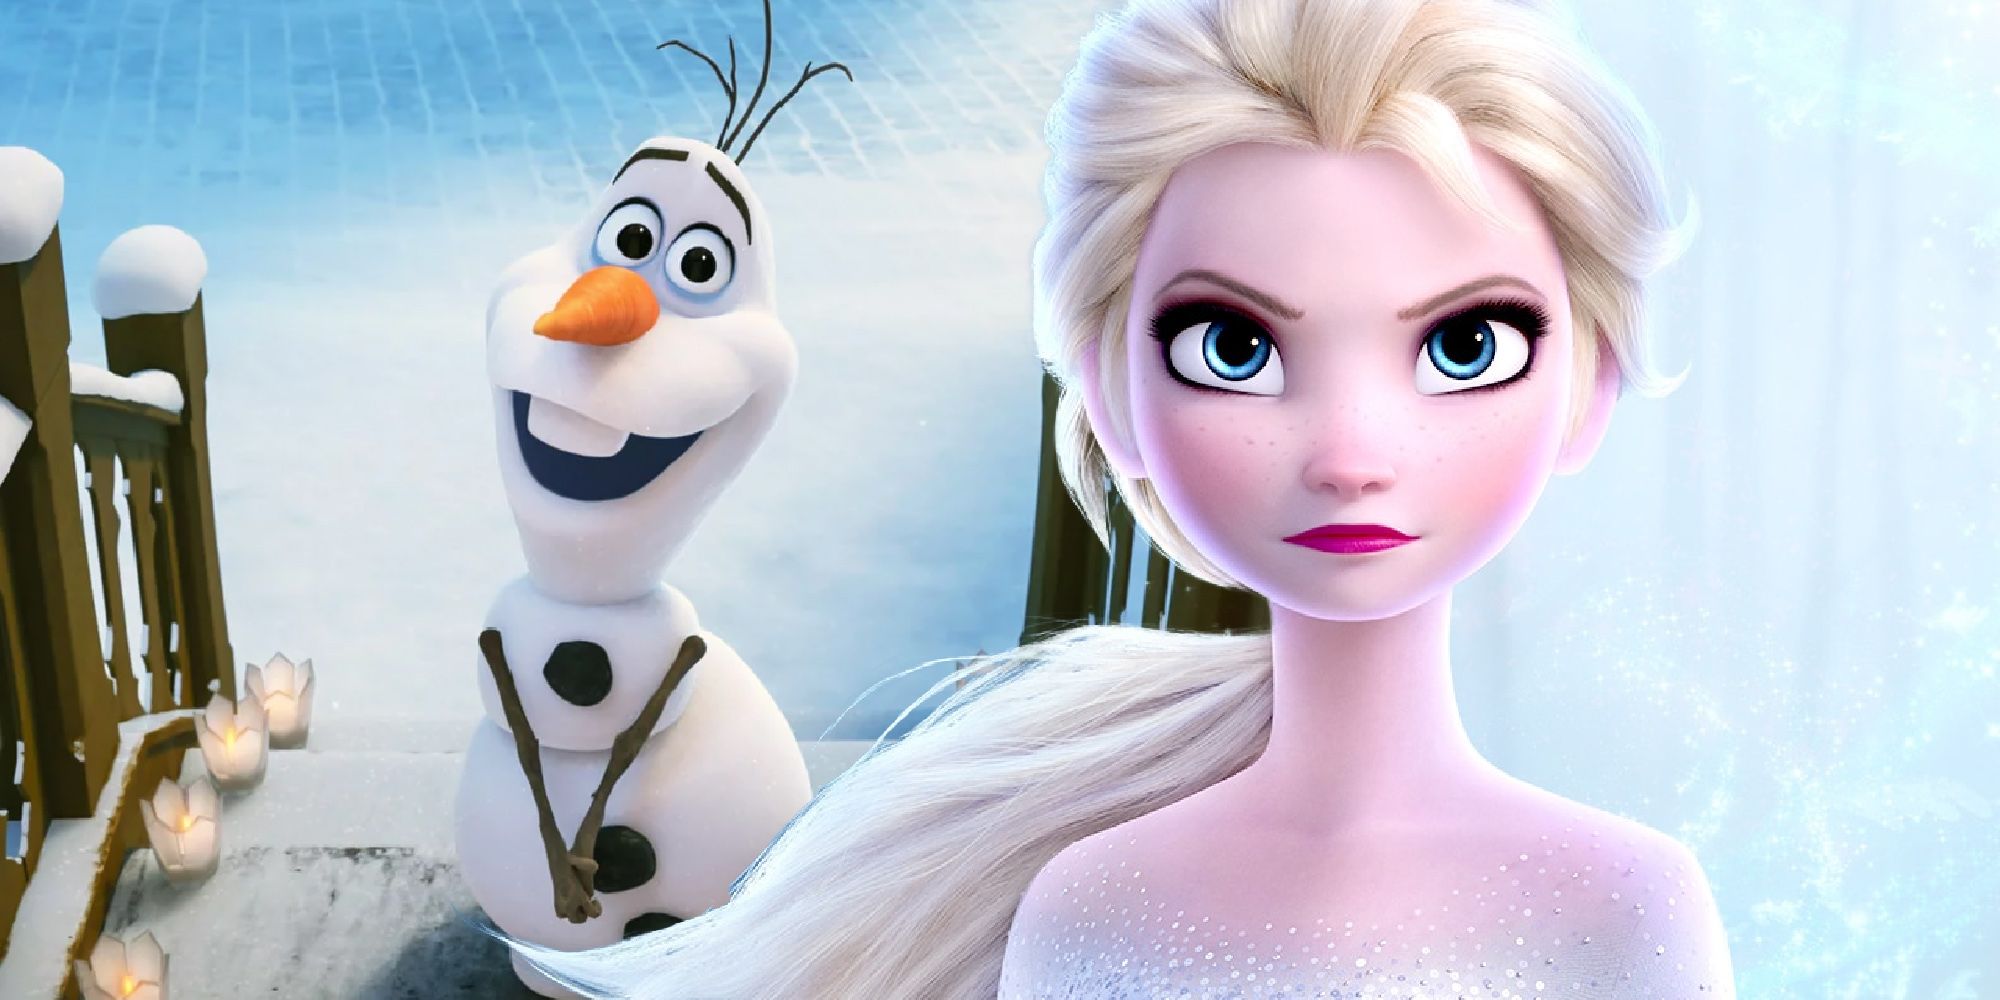 A blended image features Olaf and Elsa from Frozen